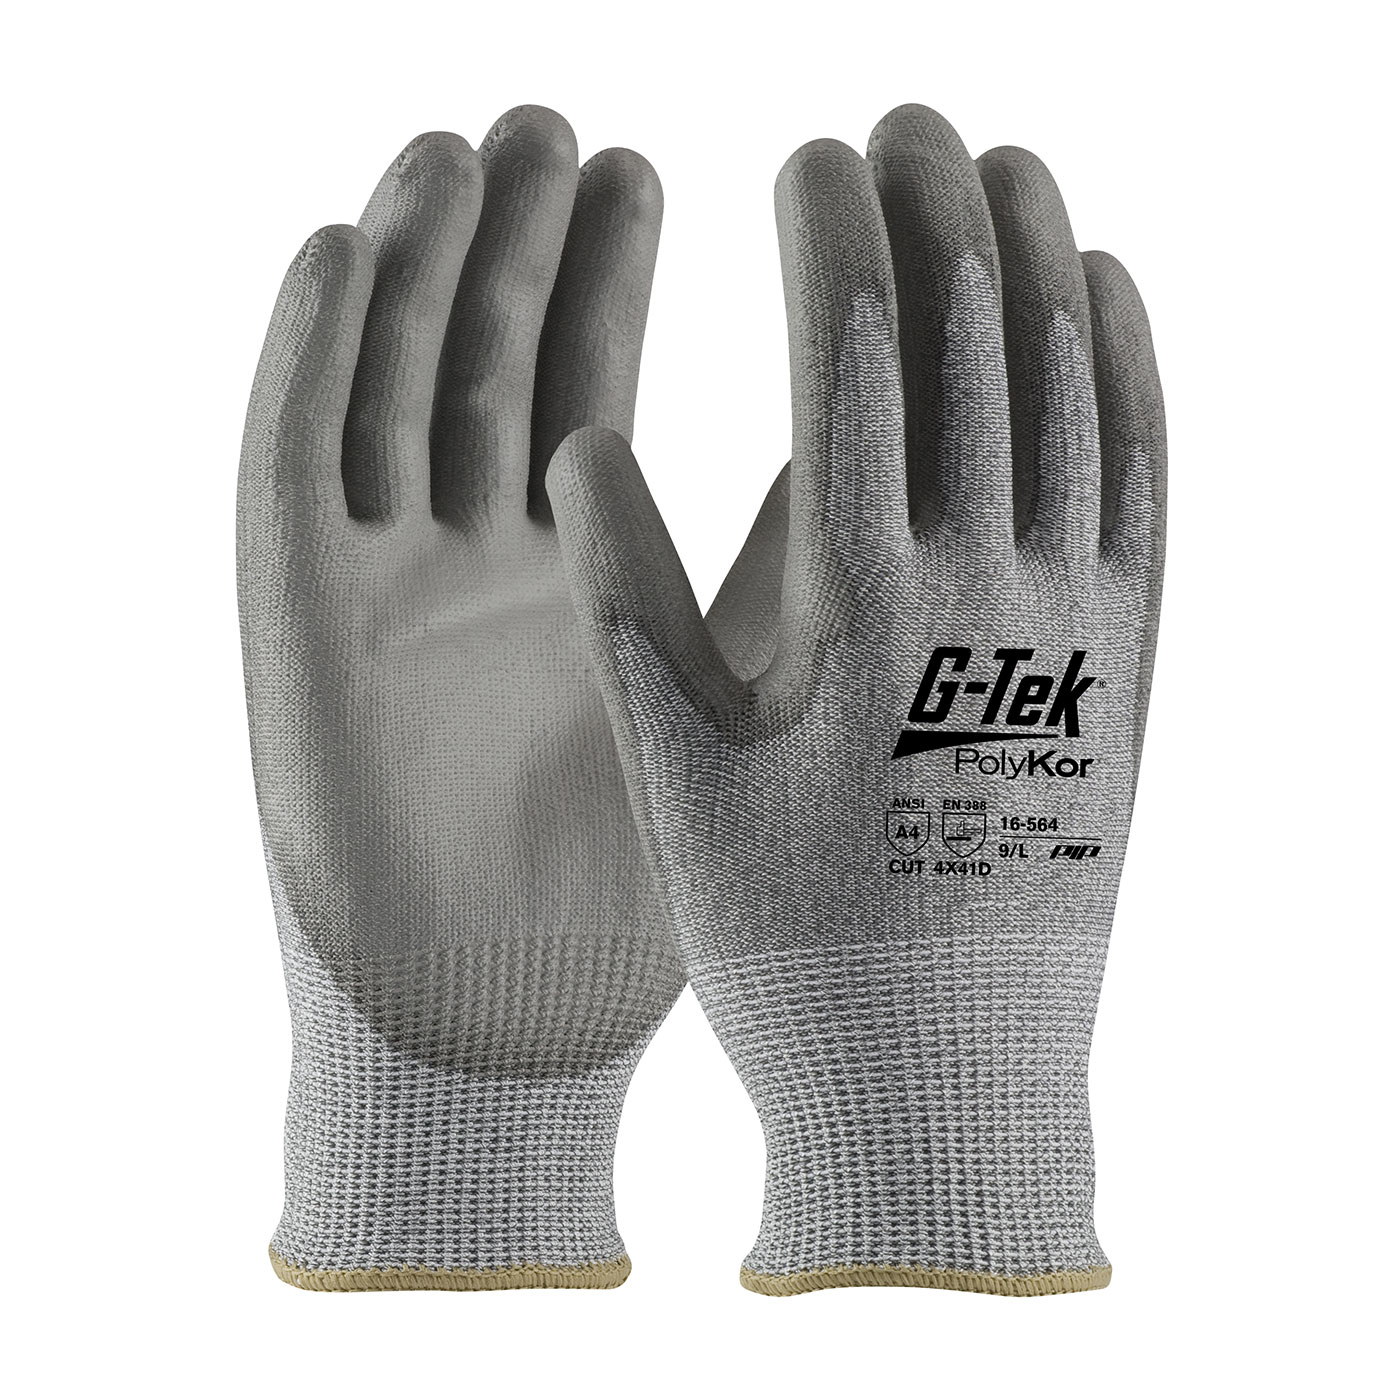 PIP 16-564/M G-Tek PolyKor Industry Grade Seamless Knit PolyKor Blended Glove with Polyurethane Coated Smooth Grip on Palm & Fingers - Medium PID-16564M